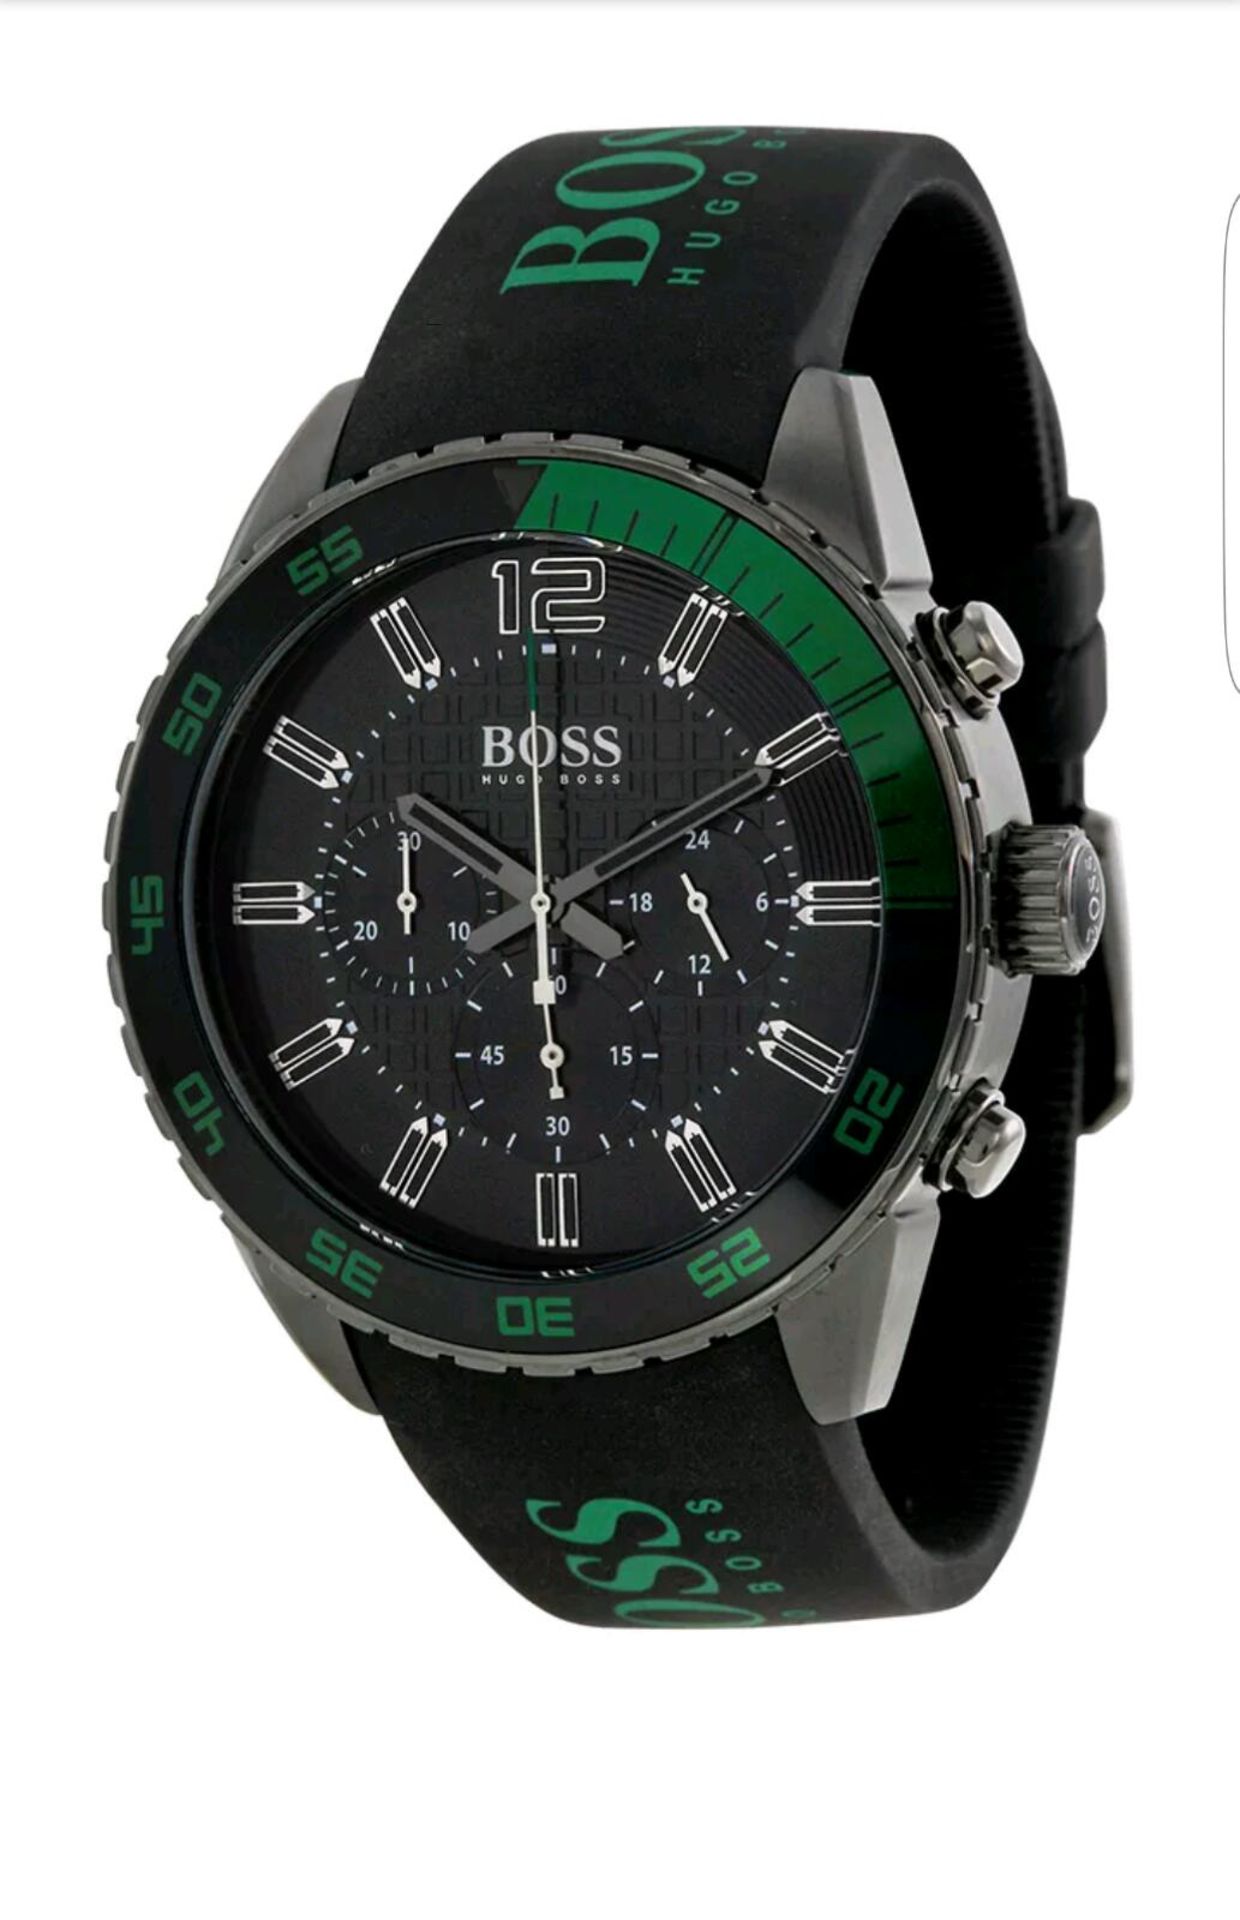 BRAND NEW HUGO BOSS 1512847, COMPLETE WITH ORIGINAL BOX AND MANUAL